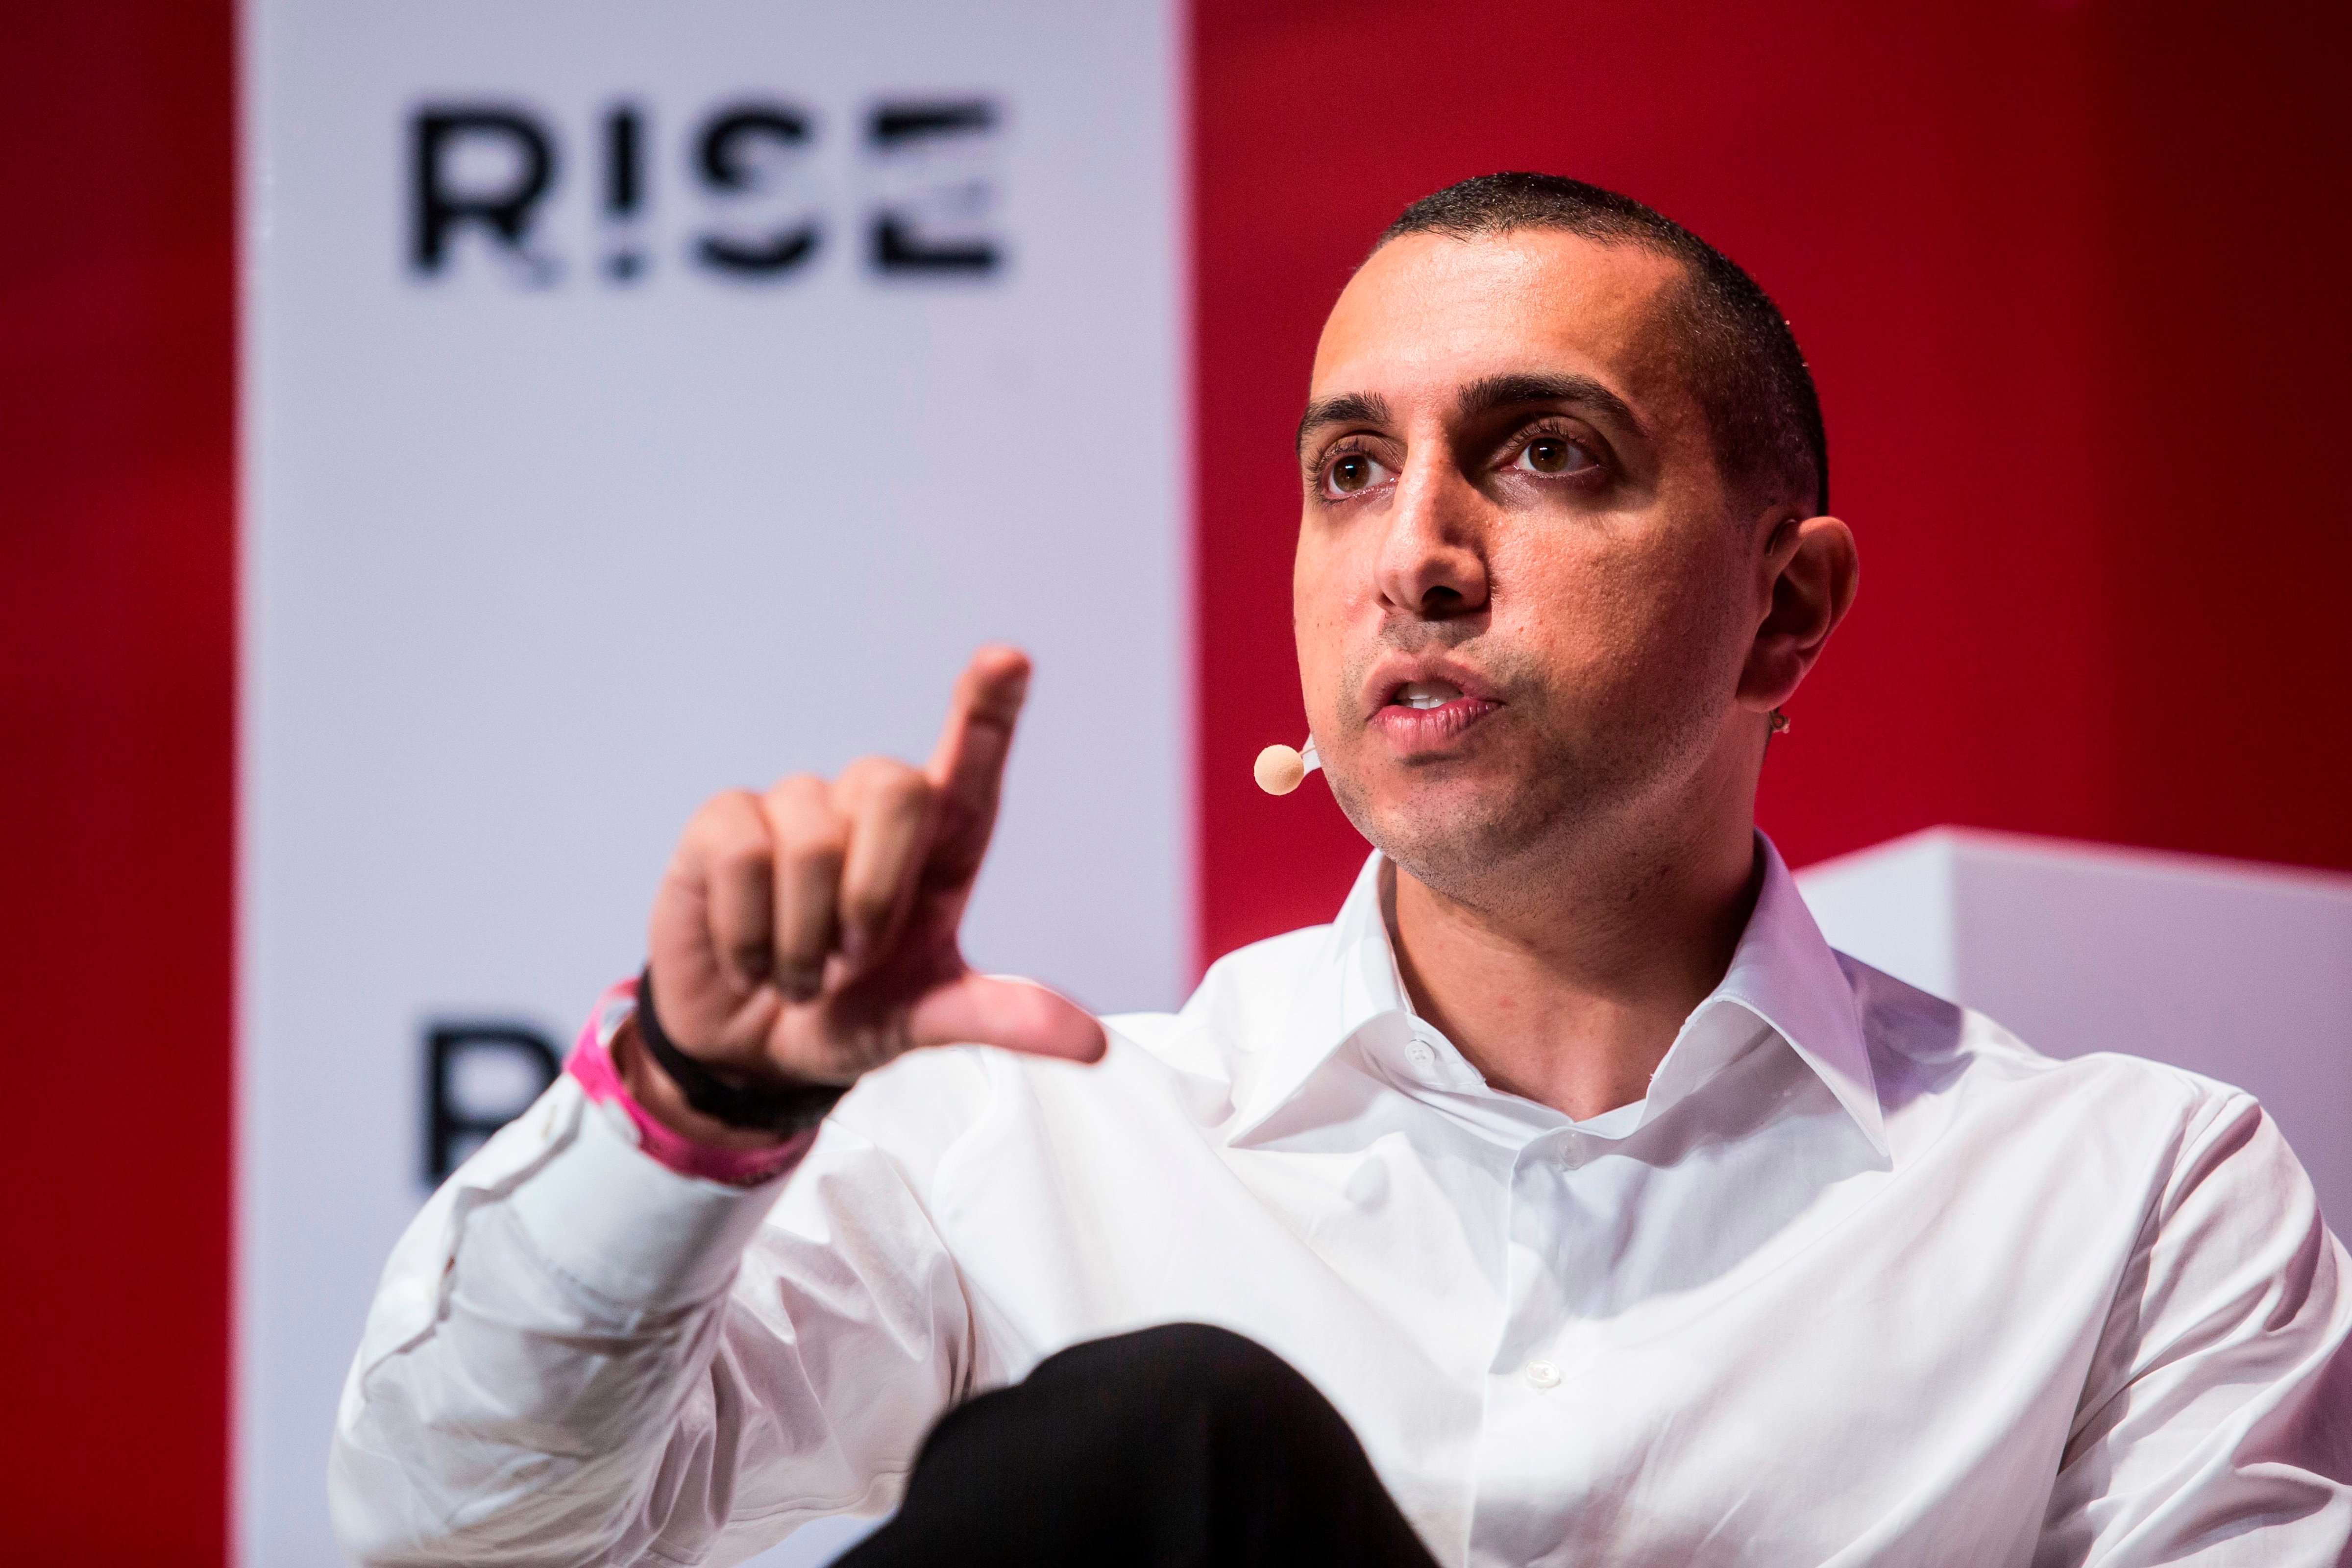 Sean Rad, founder of dating app Tinder, speaks at the RISE Technology Conference in Hong Kong on July 11, 2018. (ISAAC LAWRENCE&mdash;AFP—Getty Images)